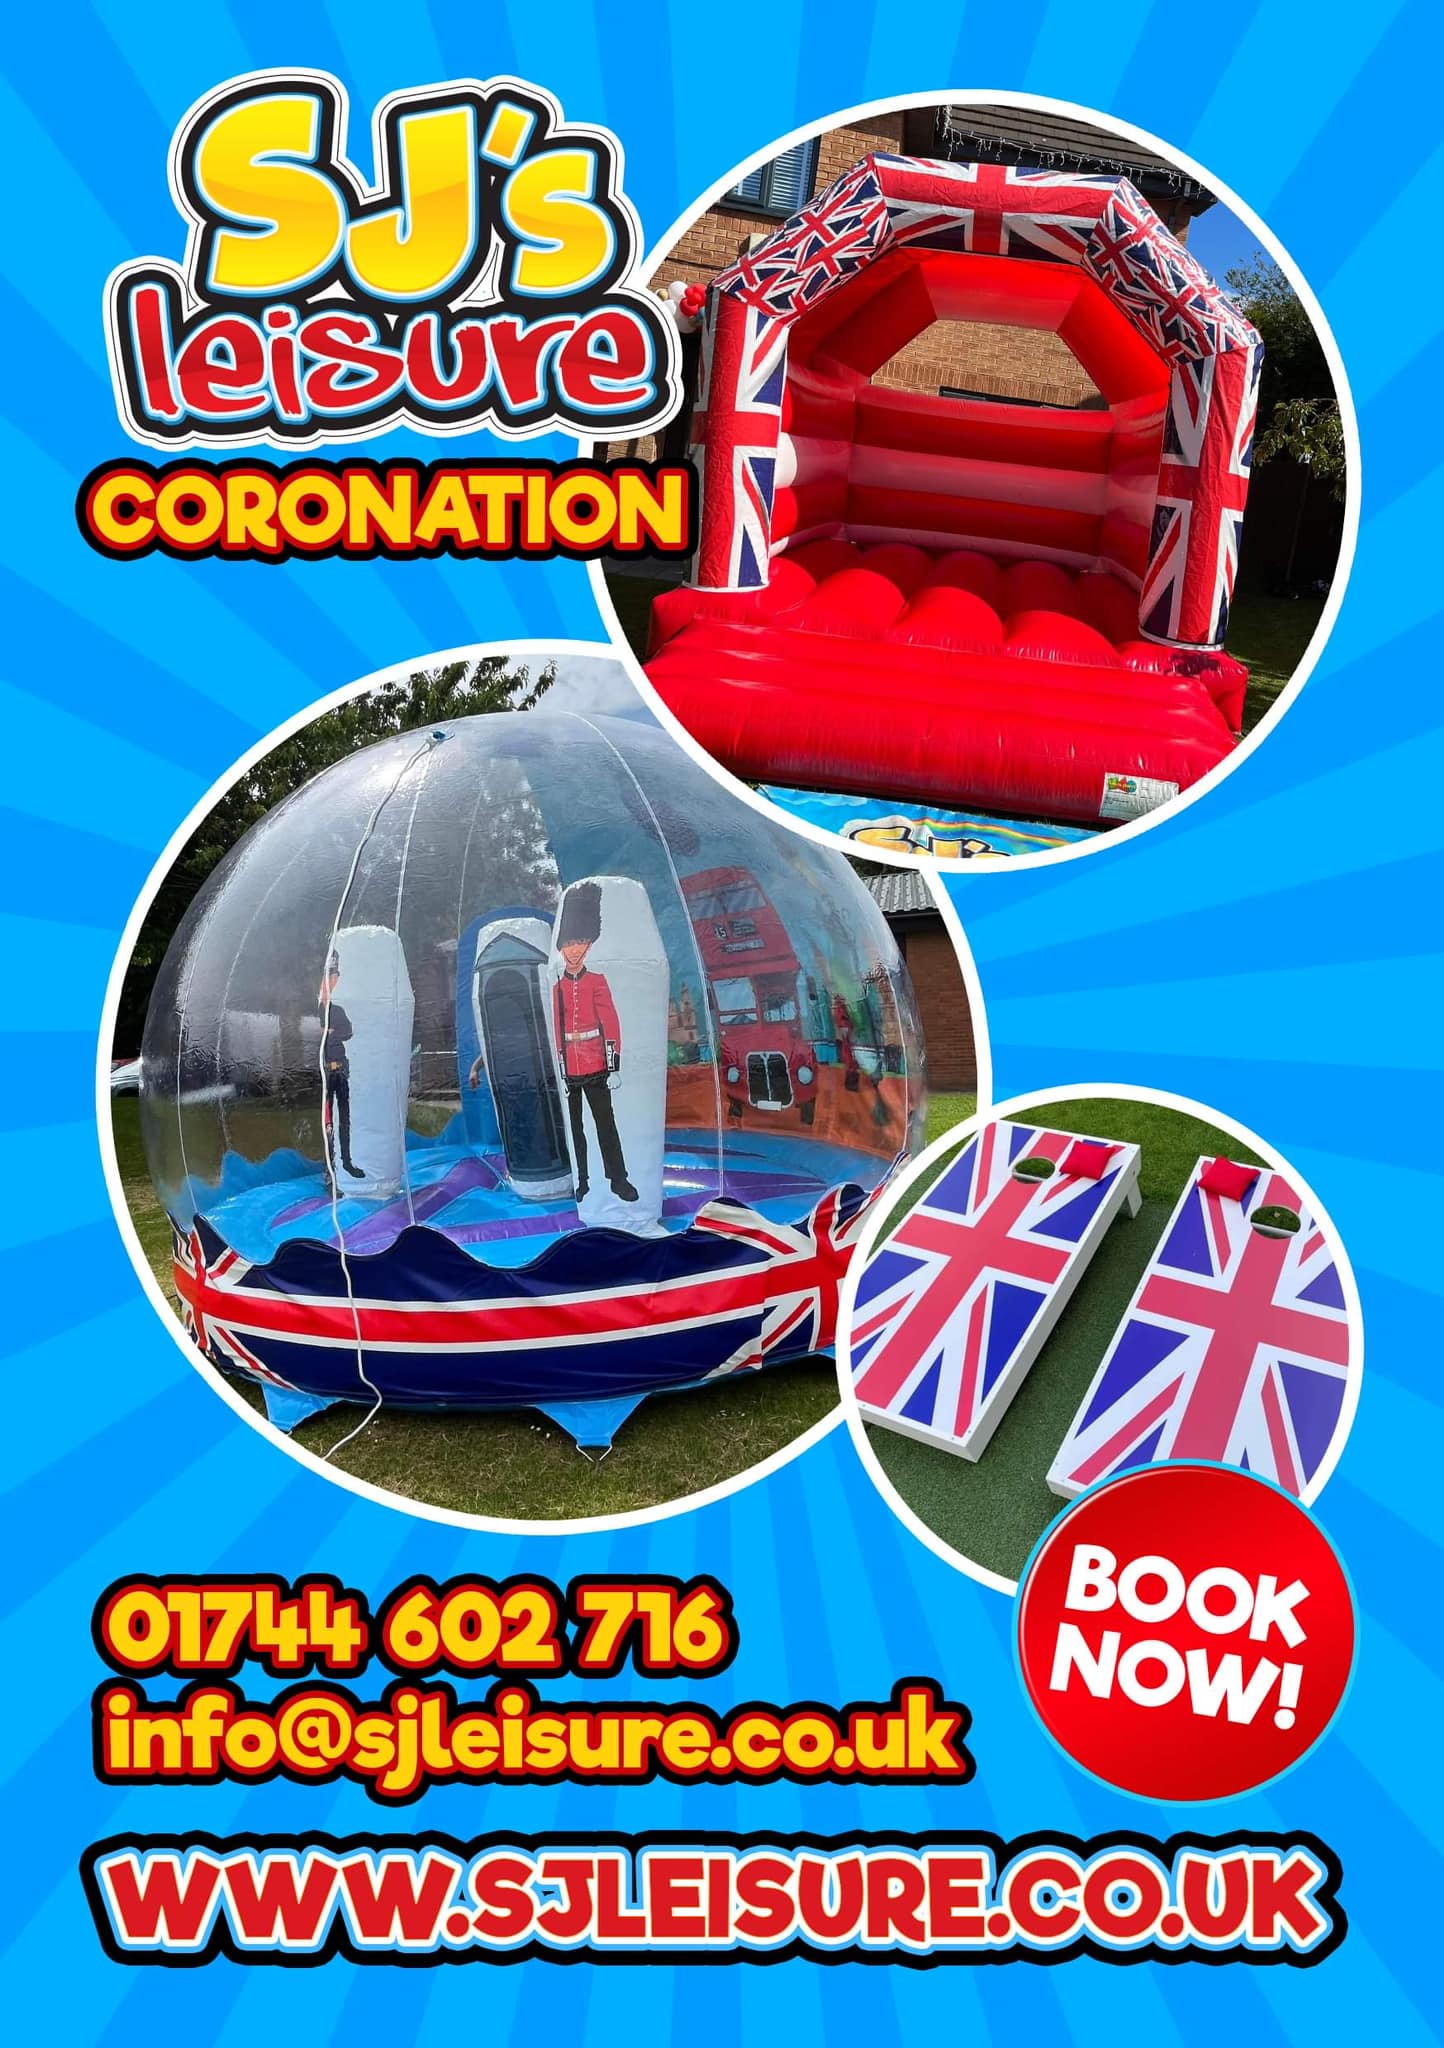 This image shows a SJ's Leisure leaflet advertising products suitable for Coronation celebrations including bouncy castles and games.